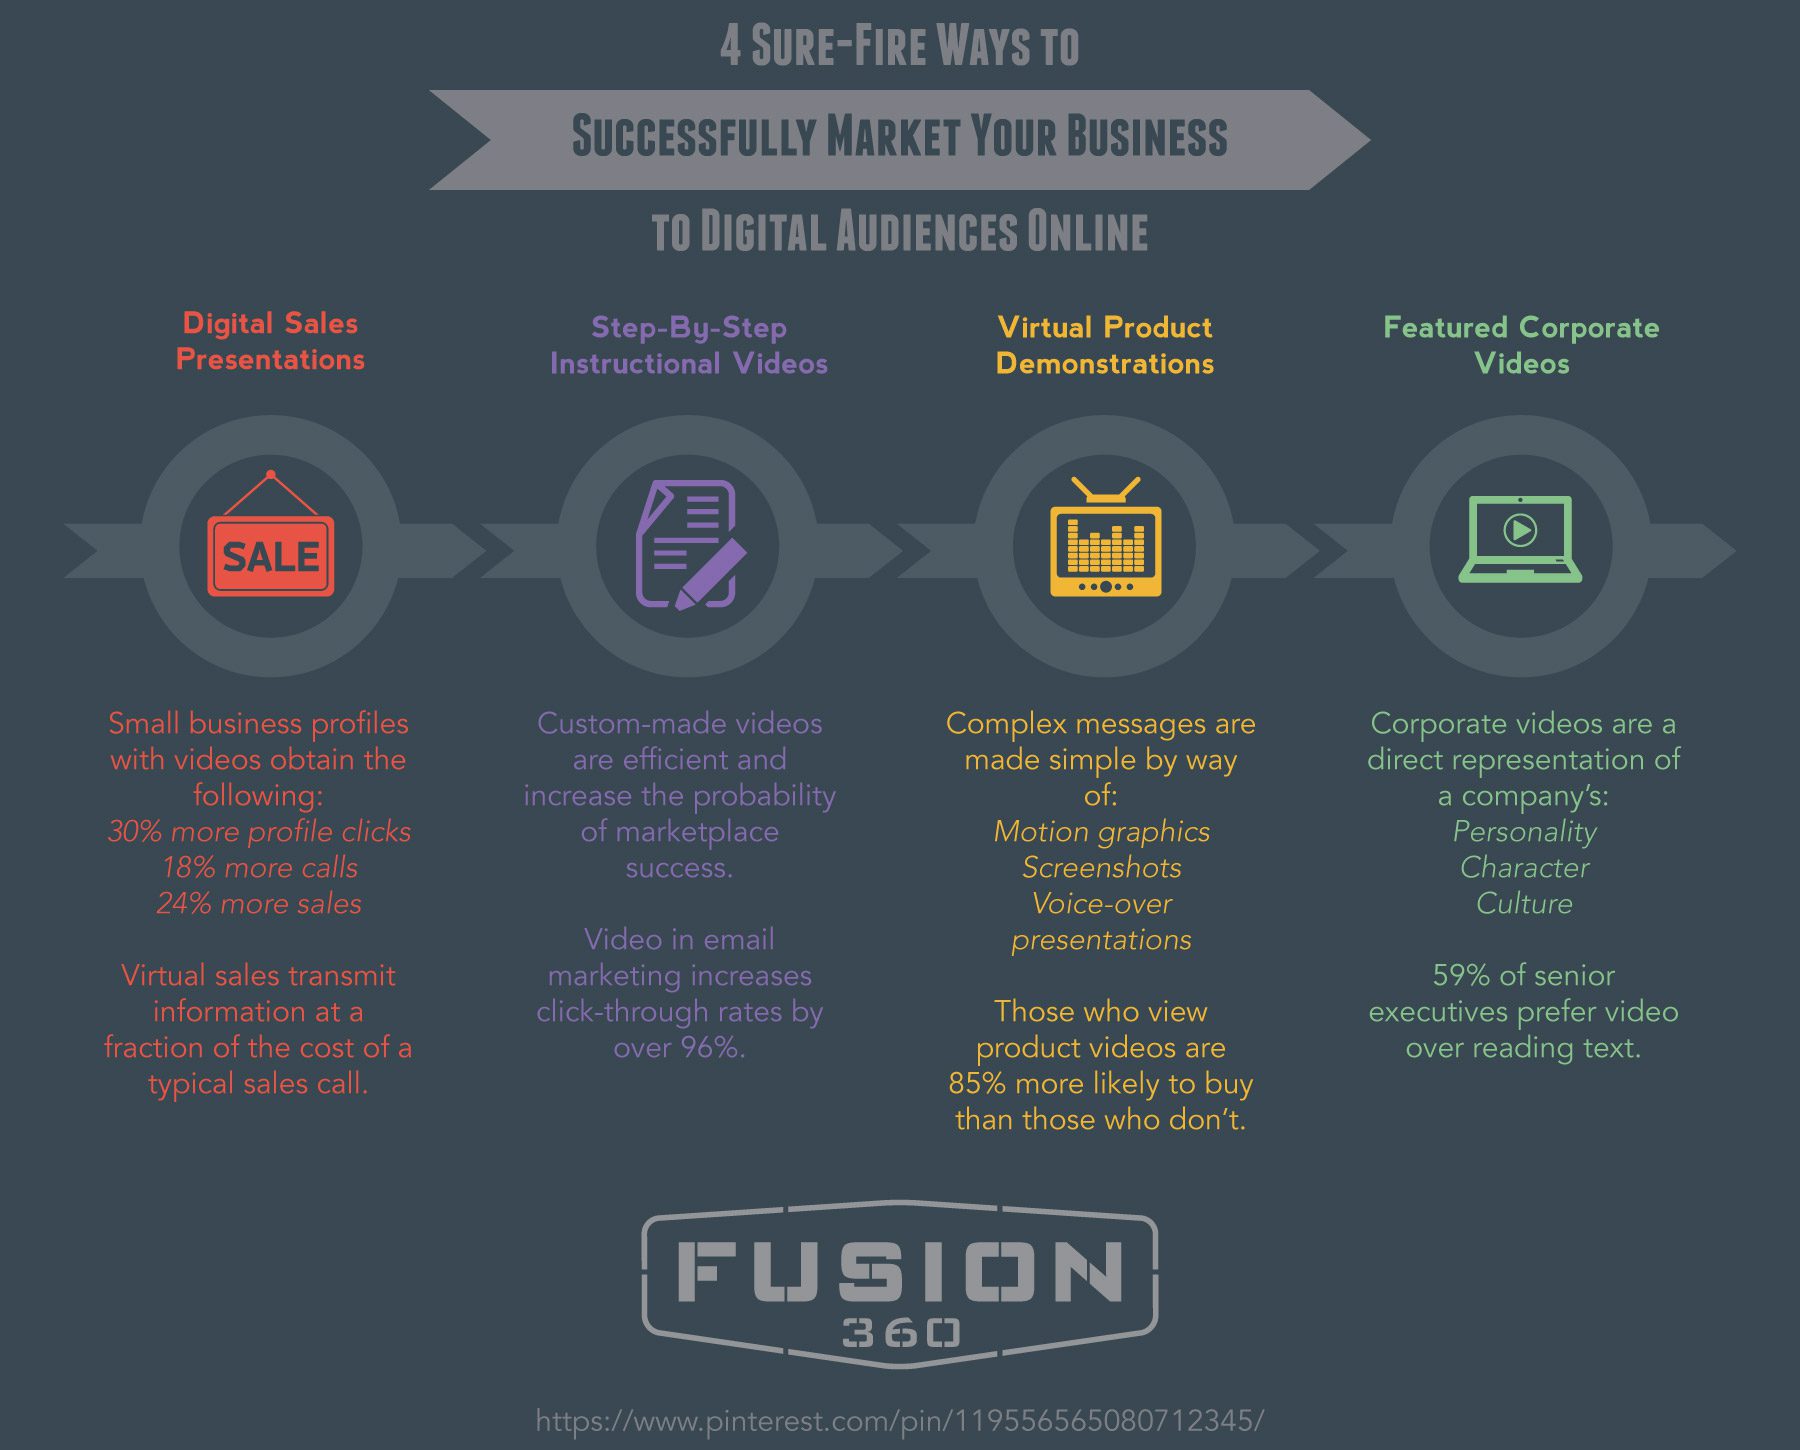 Fusion 360 - 4 Sure-Fire Ways to Successfully Market Your Business to Digital Audiences Online (Fusion 360 Video Production)